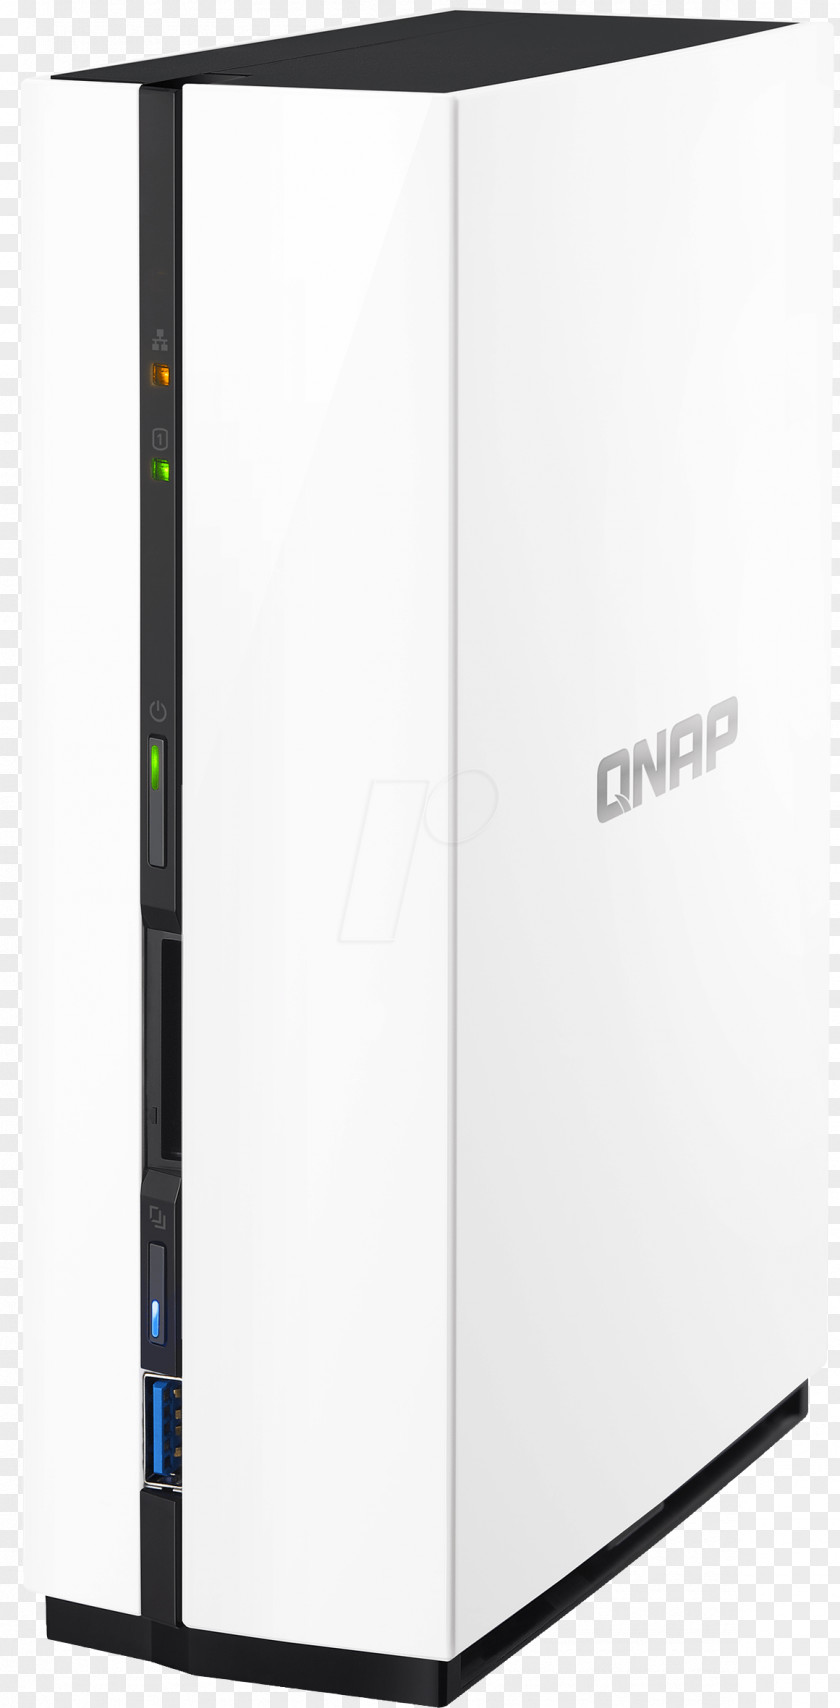 Removable Storage Devices Network Systems QNAP TS-128A 1 Bay NAS Hard Drives Systems, Inc. TAS-268-US-QUS 2 Personal Cloud DLNA PNG